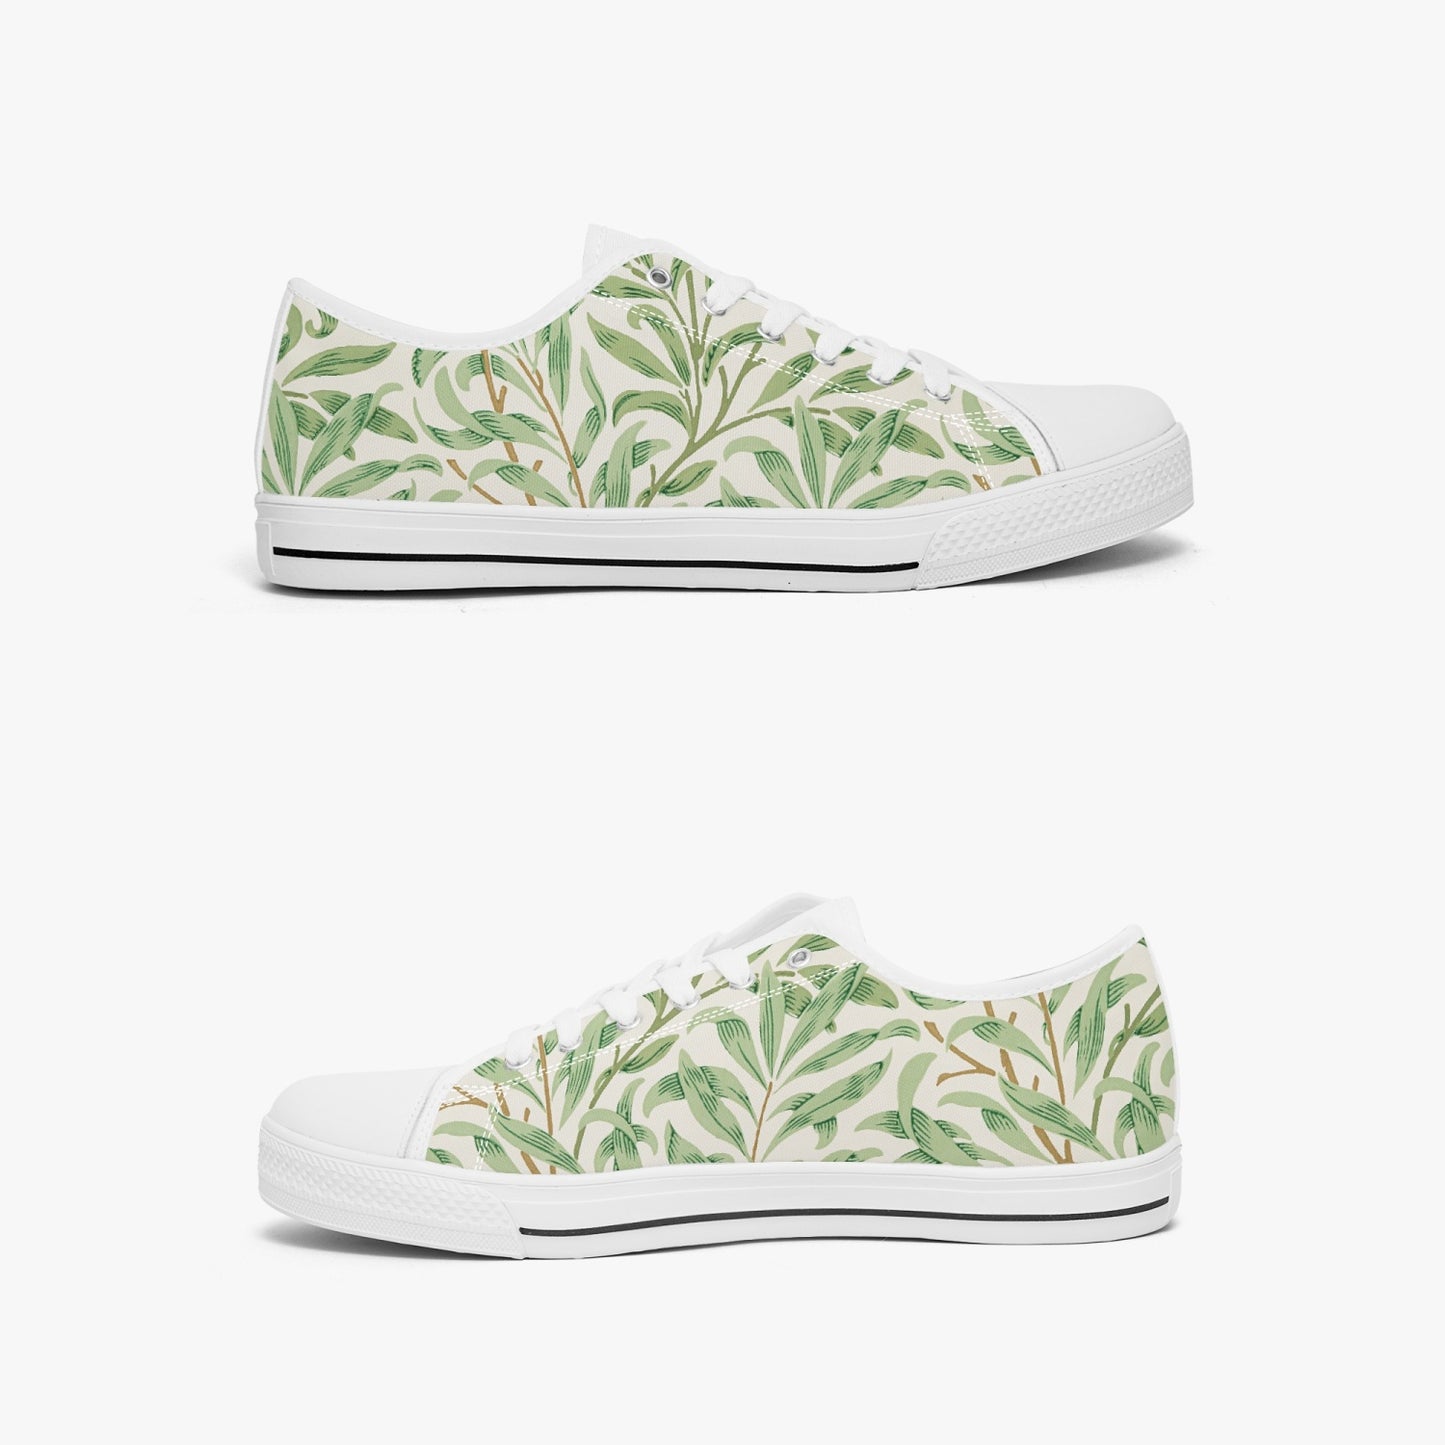 Flowered Sneakers: Canvas Low-Tops with Willow Bough William Morris Wallpaper Design